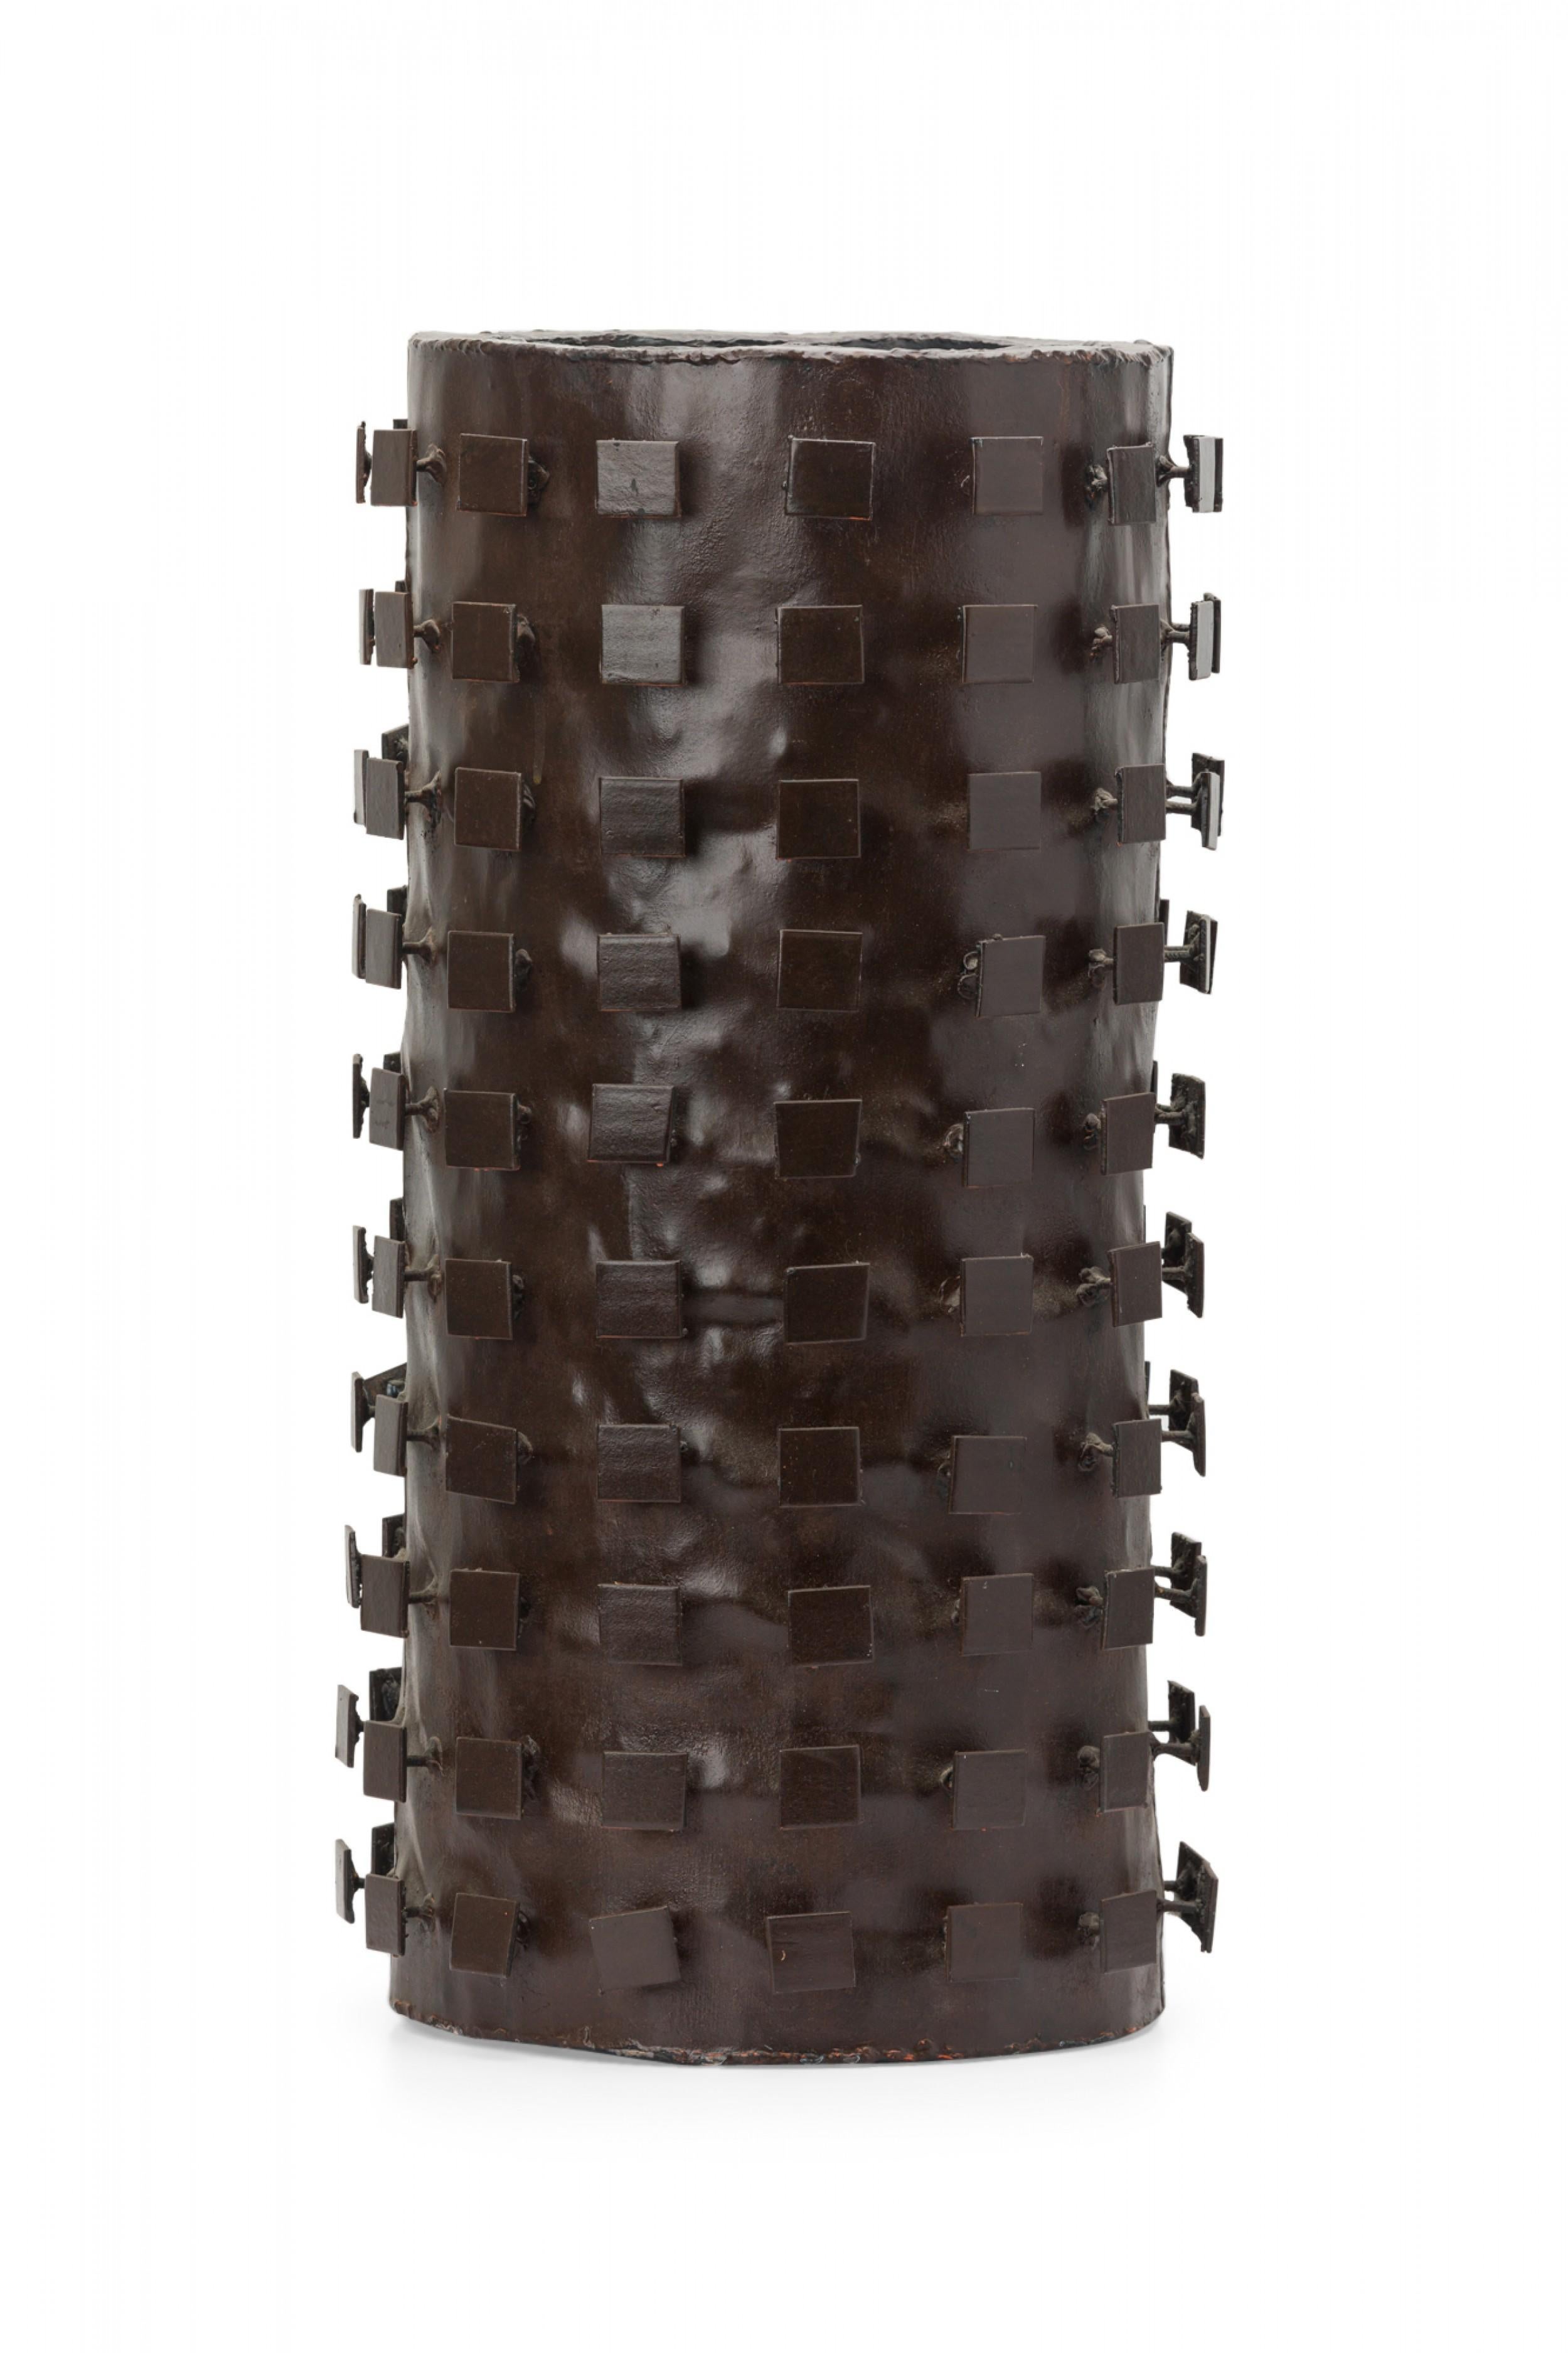 American mid-century Brutalist-style patinated steel cylindrical umbrella stand with a design of spines ending in steel squares around the exterior.